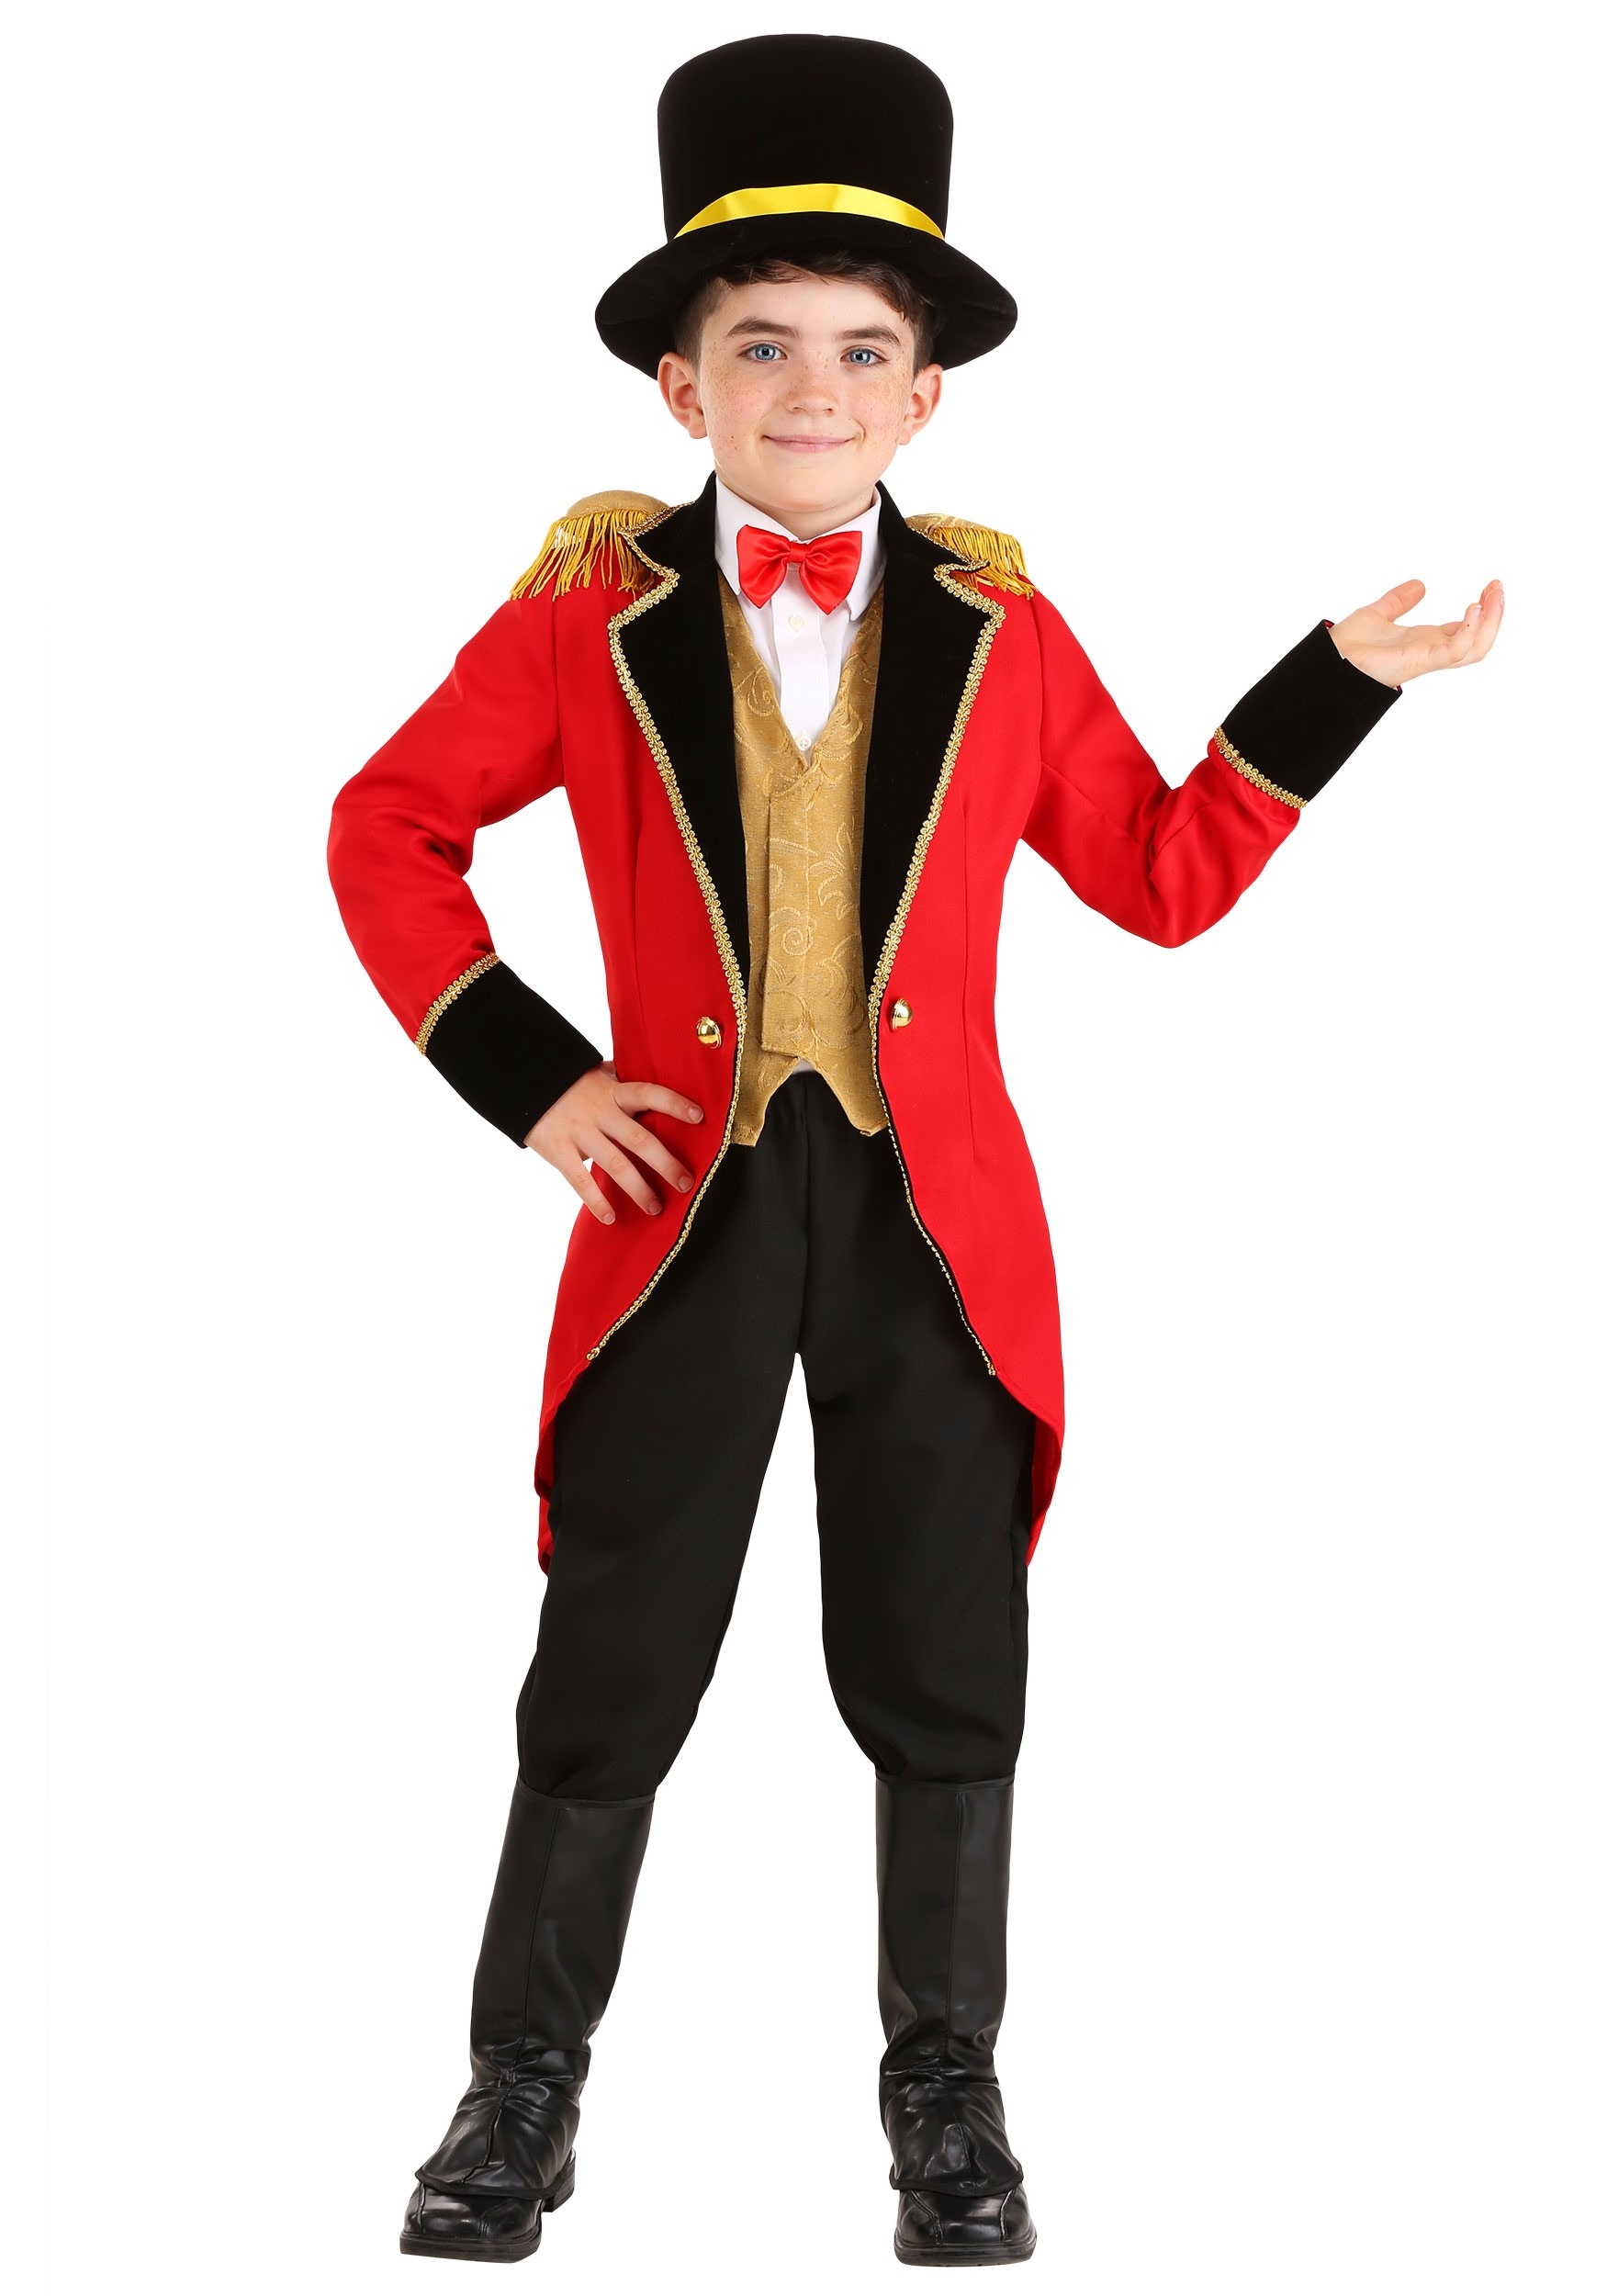 Photos - Fancy Dress FUN Costumes Ringmaster Costume for Boys | Circus Costumes for Kids Black&